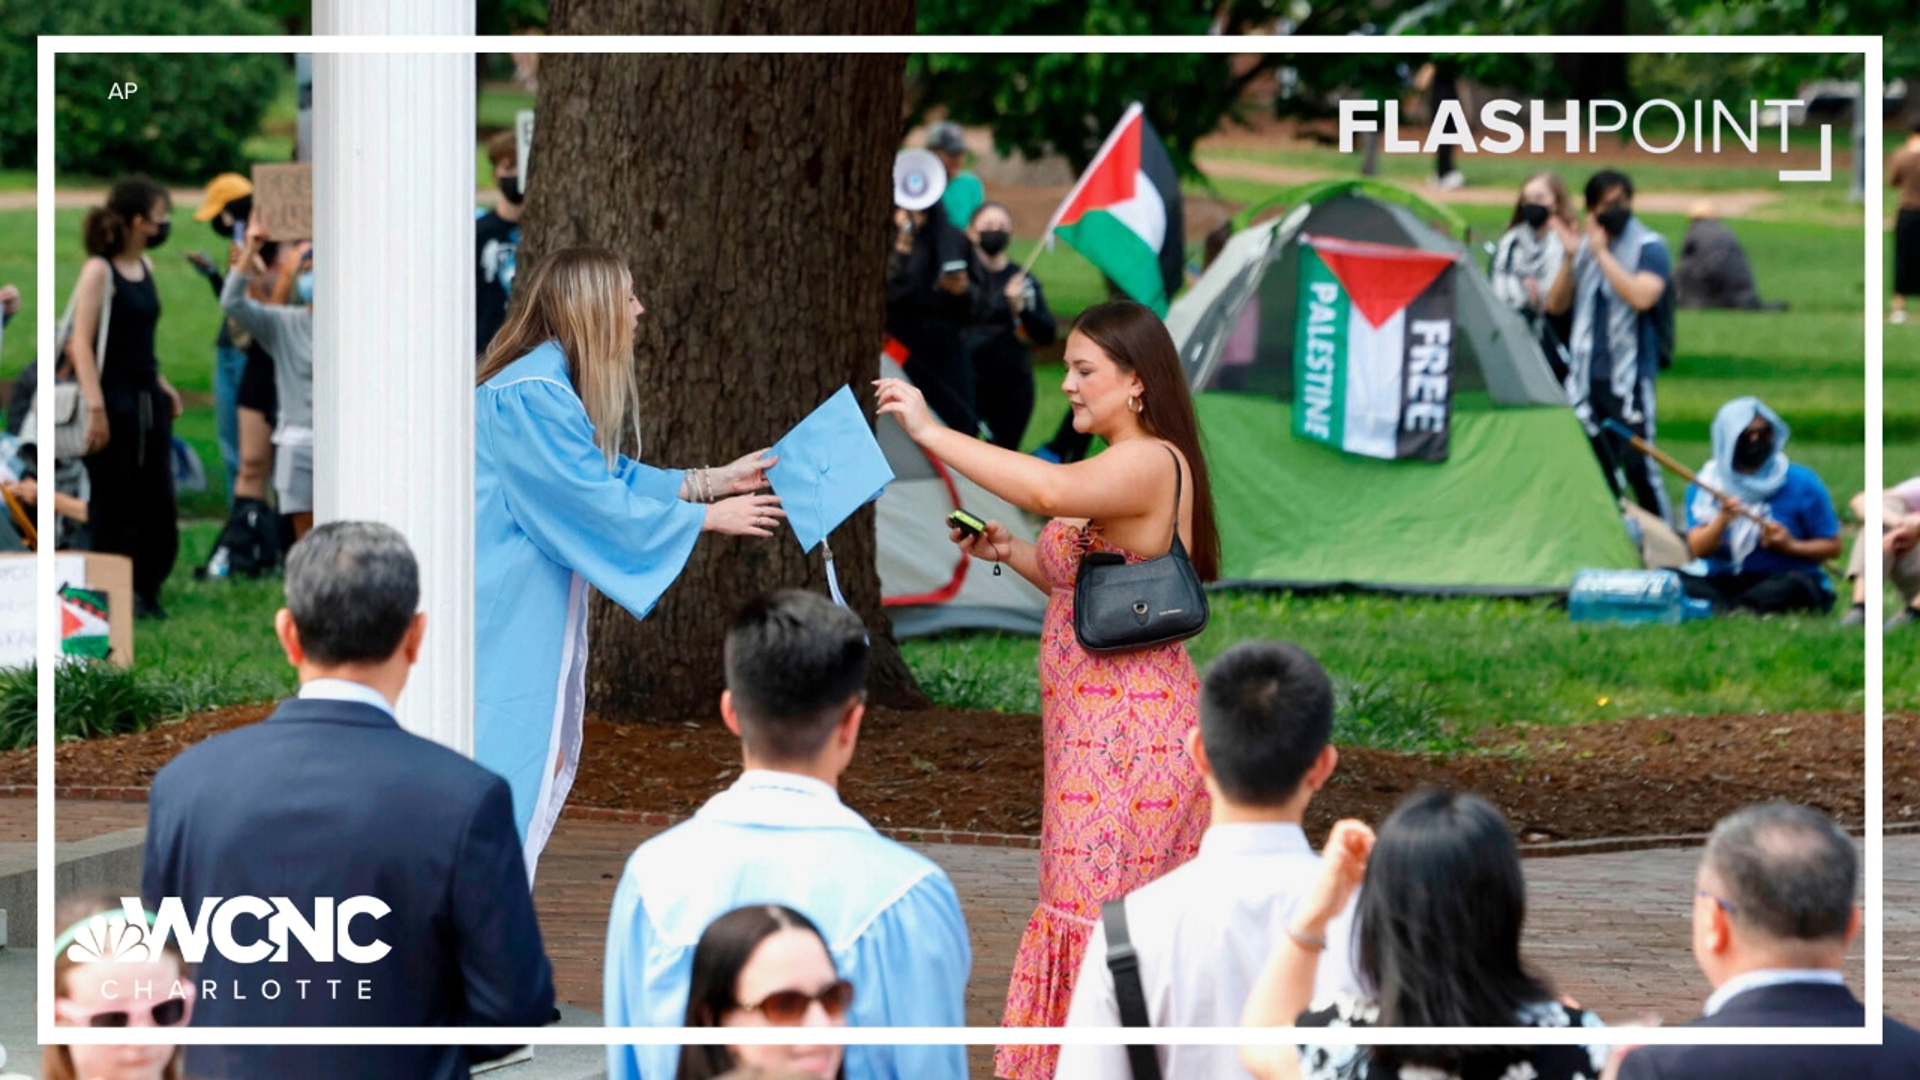 On Flashpoint, two perspectives on the conflict in the Middle East discuss the protests playing out on North Carolina campuses.